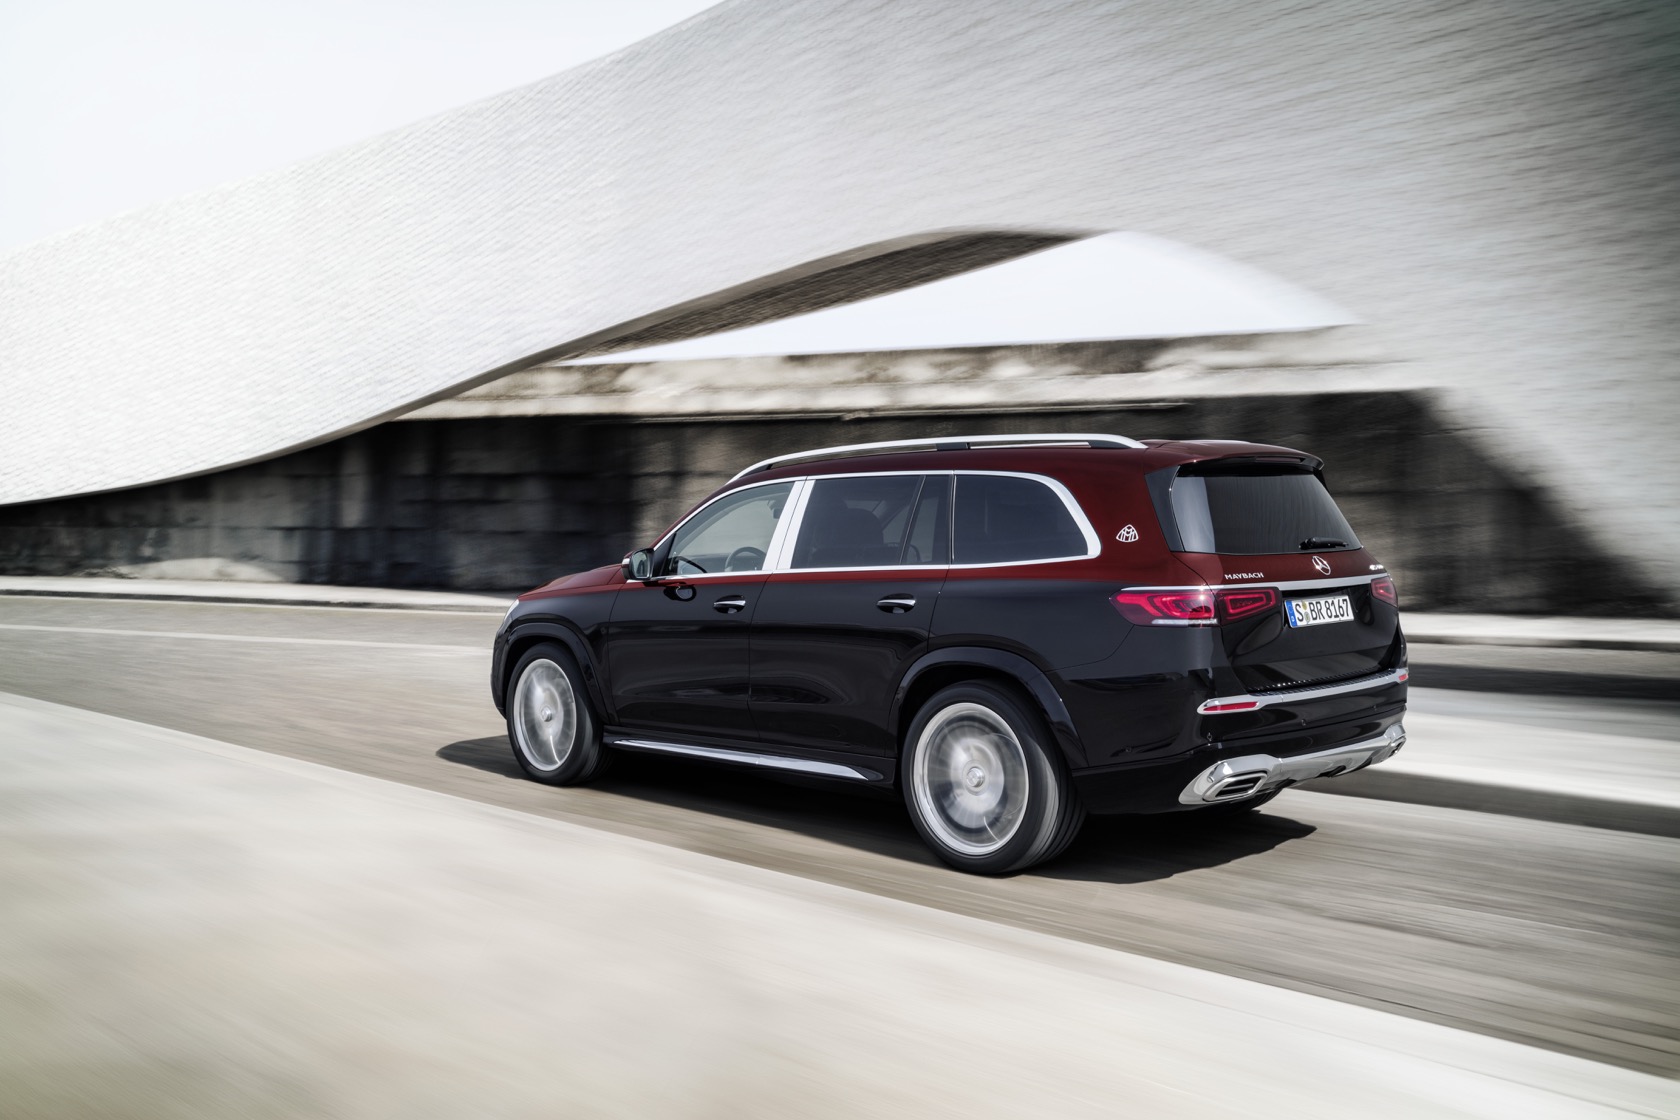 This Mercedes Maybach Gls 600 Is About As Excessive As